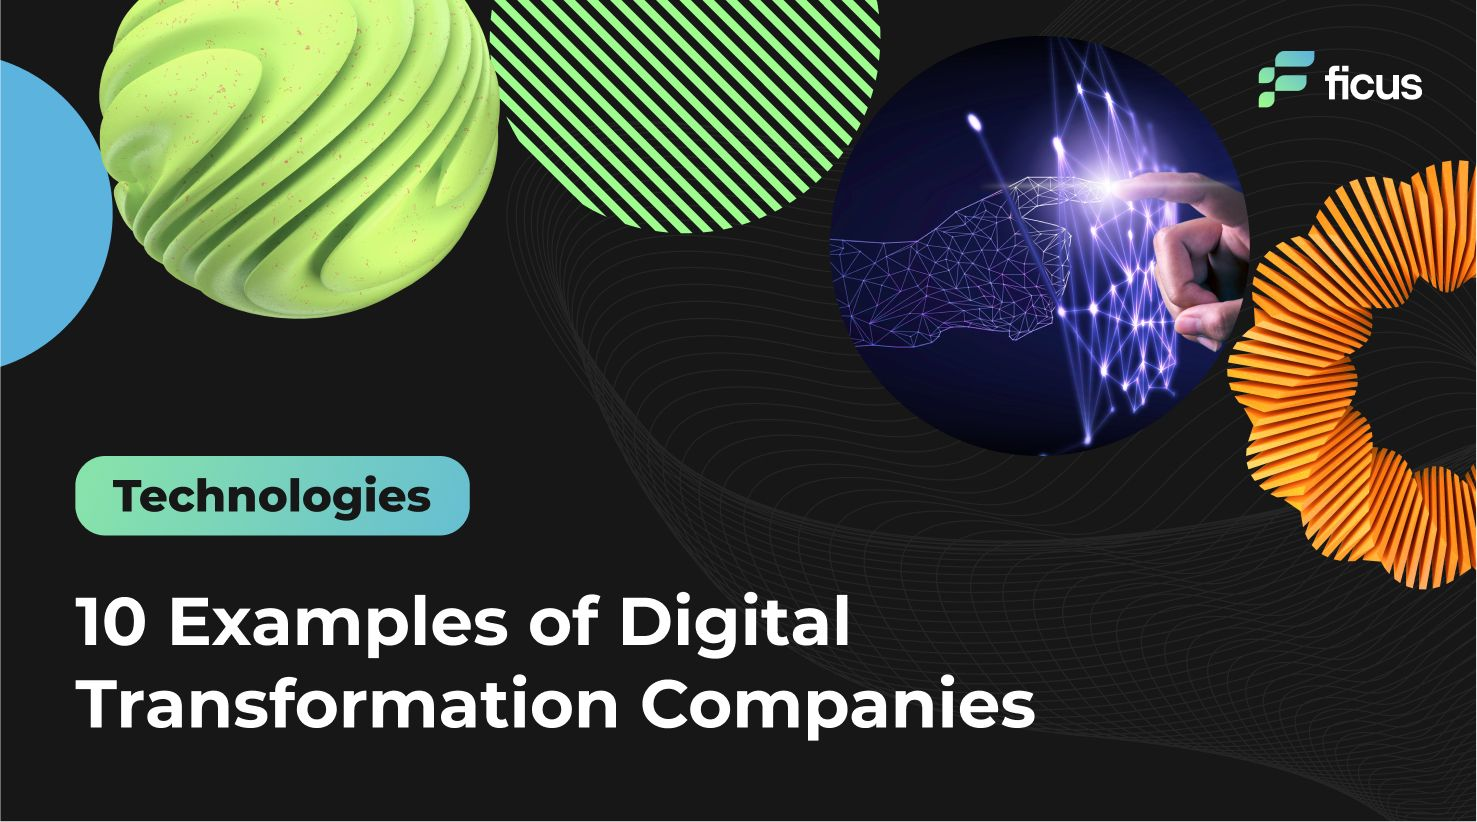 10 Examples of Digital Transformation Companies